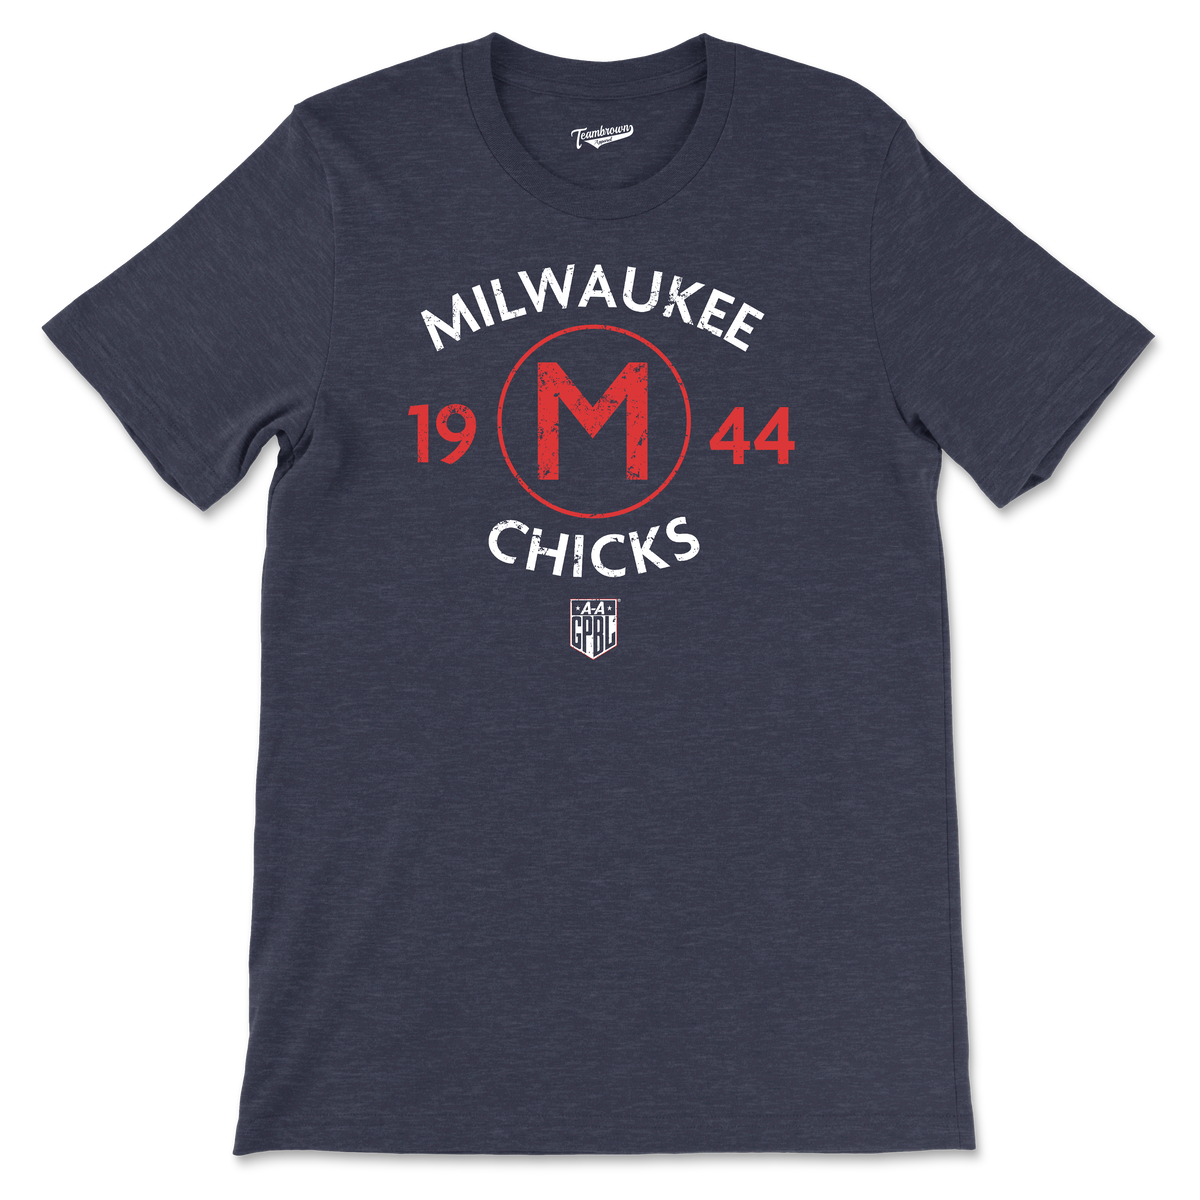 Milwaukee Chicks Champions - Unisex T-Shirt | Officially Licensed - AAGPBL